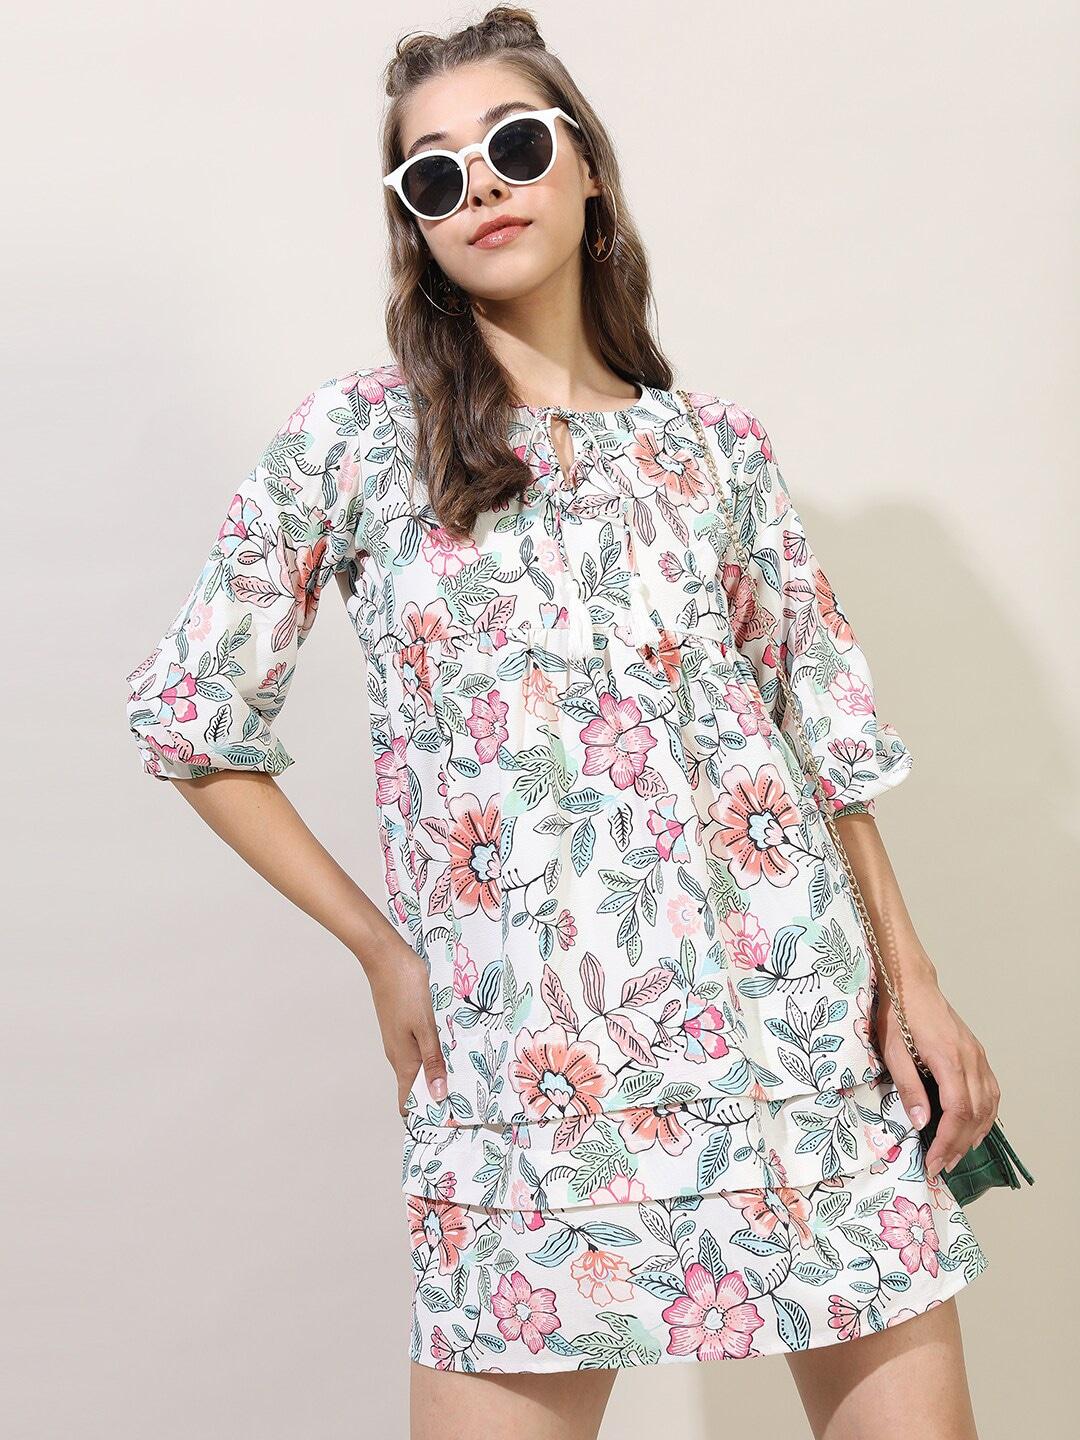 Tokyo Talkies Women White & Green Floral Printed Tie-Up Neck A-Line Dress